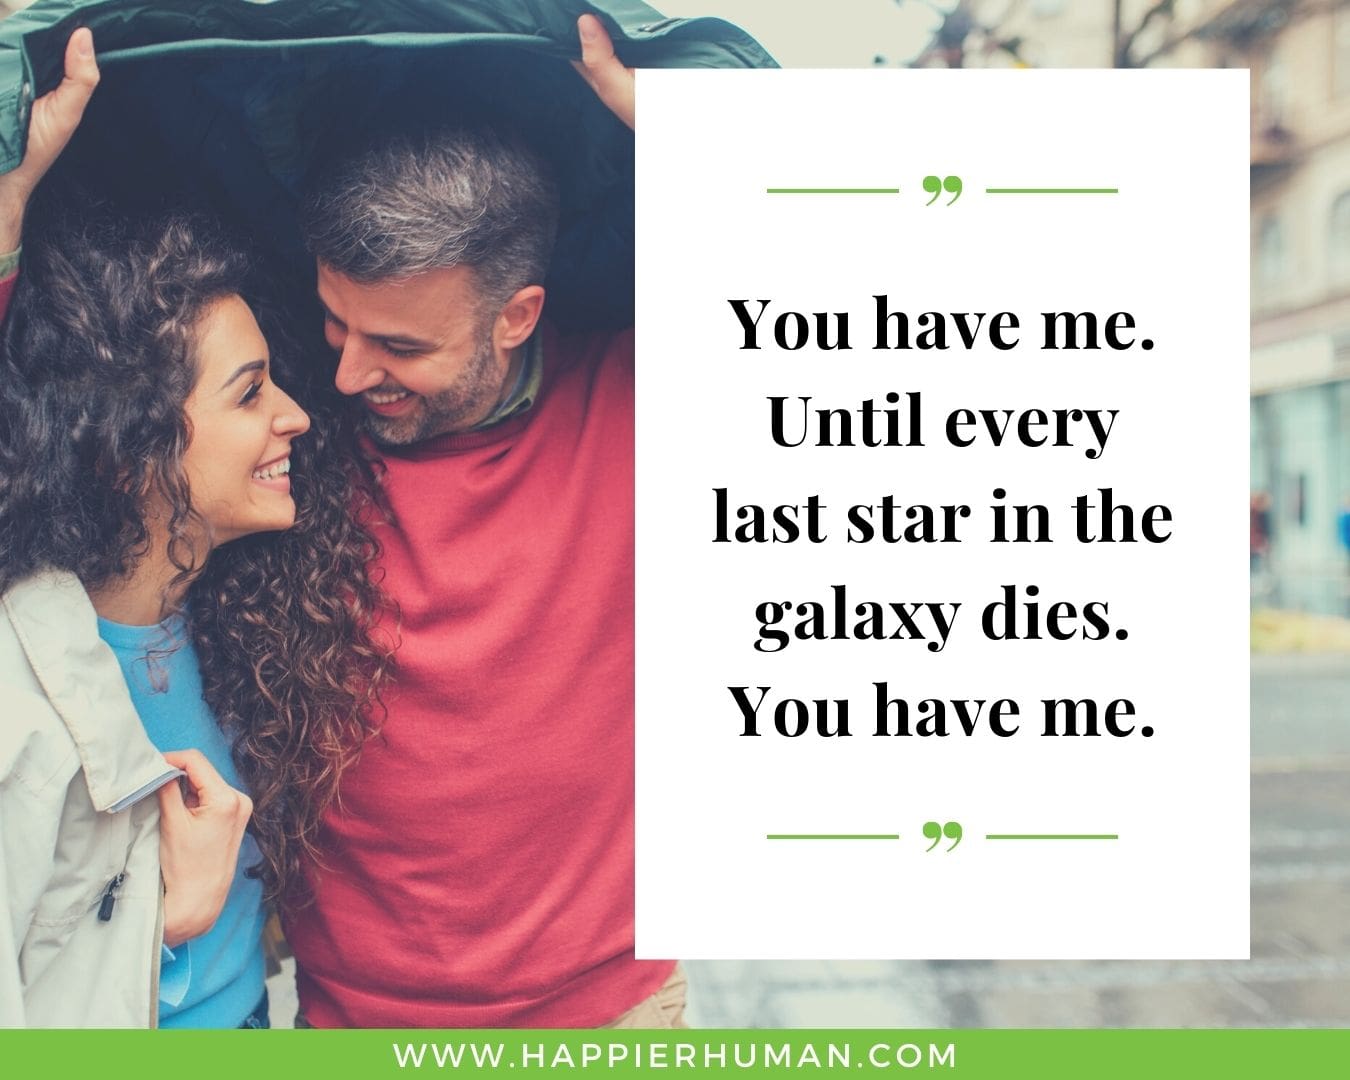 Unconditional Love Quotes for Her - “You have me. Until every last star in the galaxy dies. You have me.”